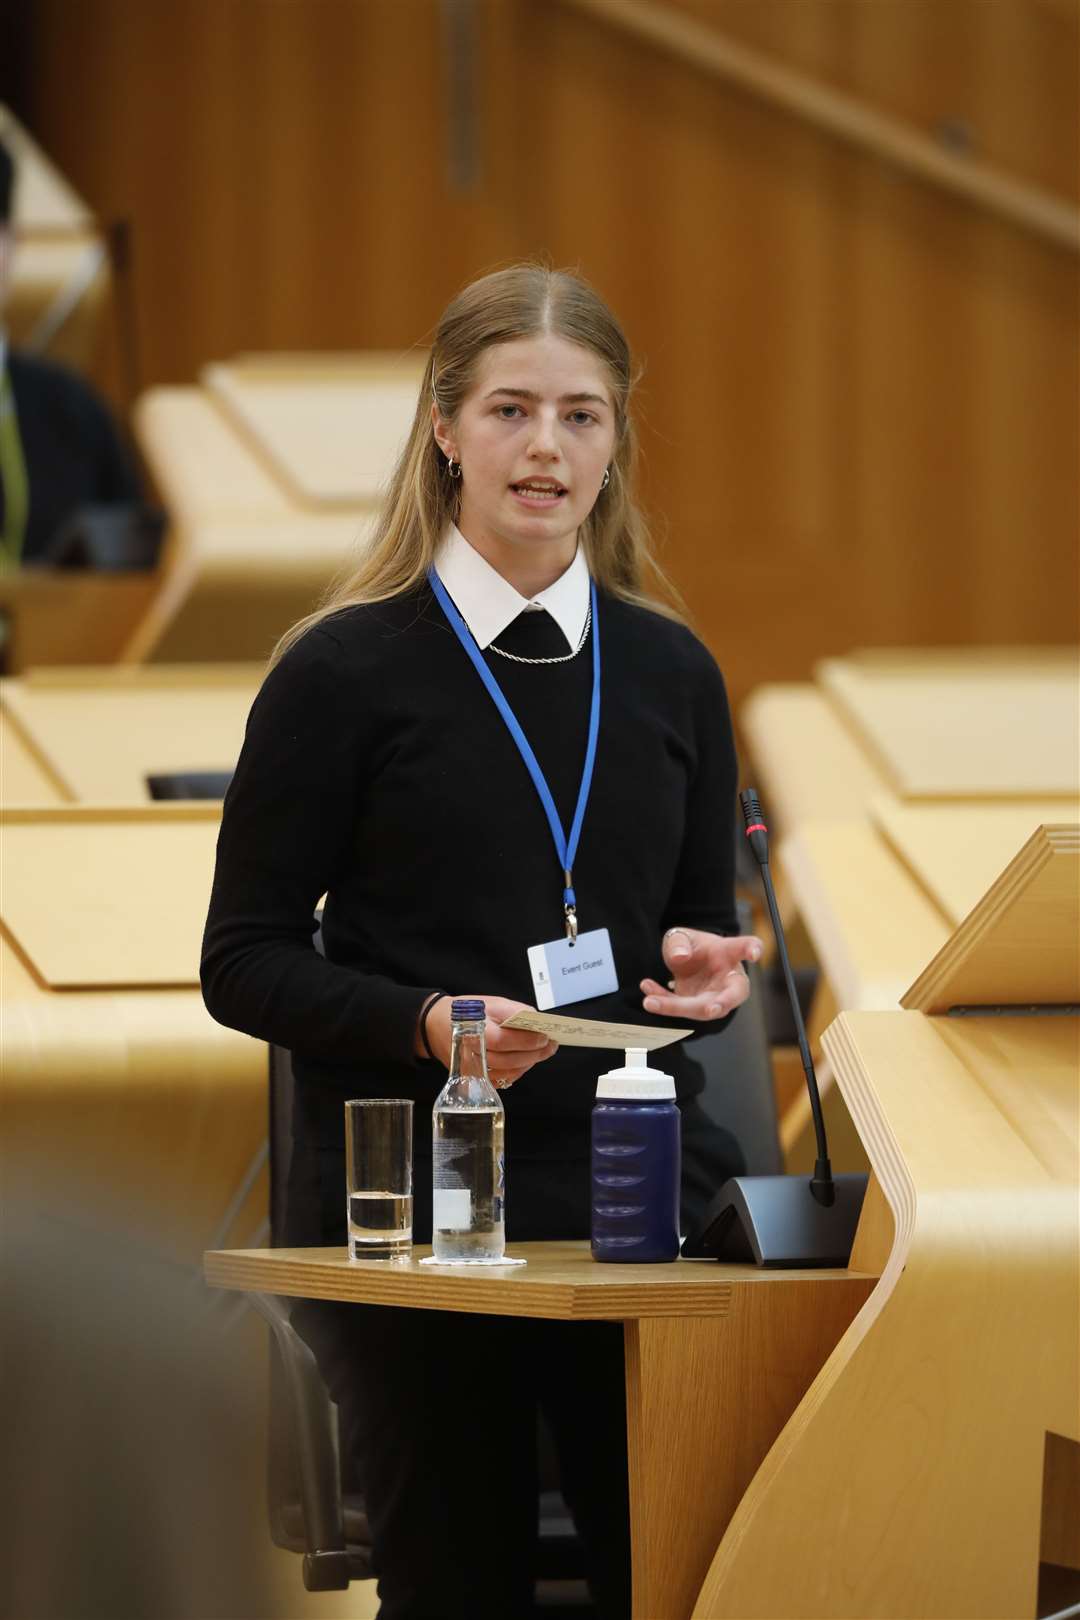 Orla McMichael, Fortrose Academy pictured during the Donald Dewar Memorial Debate final which took place in the Debating Chamber of the Scottish Parliament, Edinburgh. Teams from Fortrose Academy, Hutchesons Grammar School, High School of Glasgow and Dunfermline High School took part in the final where they debated to proposition "This House regrets the emergence of ‘cancel culture’". 09 June 2022. Pic - Andrew Cowan/Scottish Parliament